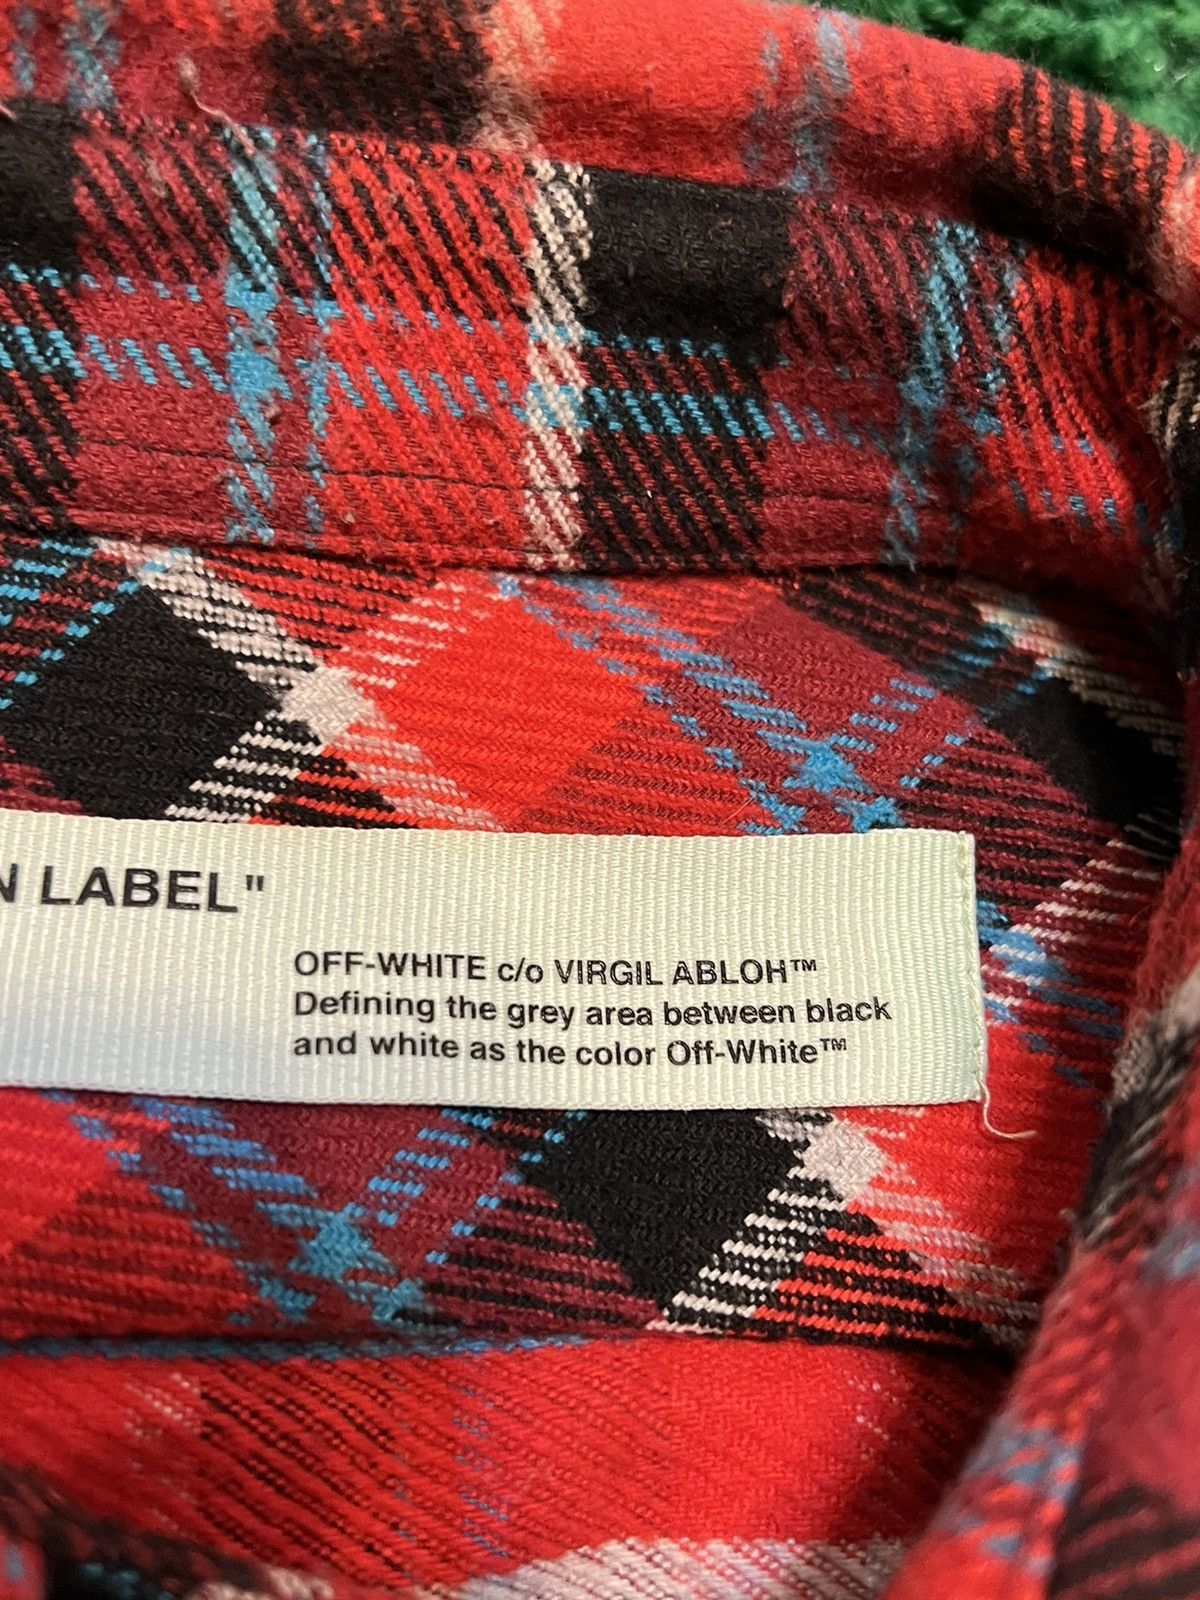 Off-White Off-White Red Check Flannel Longsleeve Size US M / EU 48-50 / 2 - 9 Thumbnail